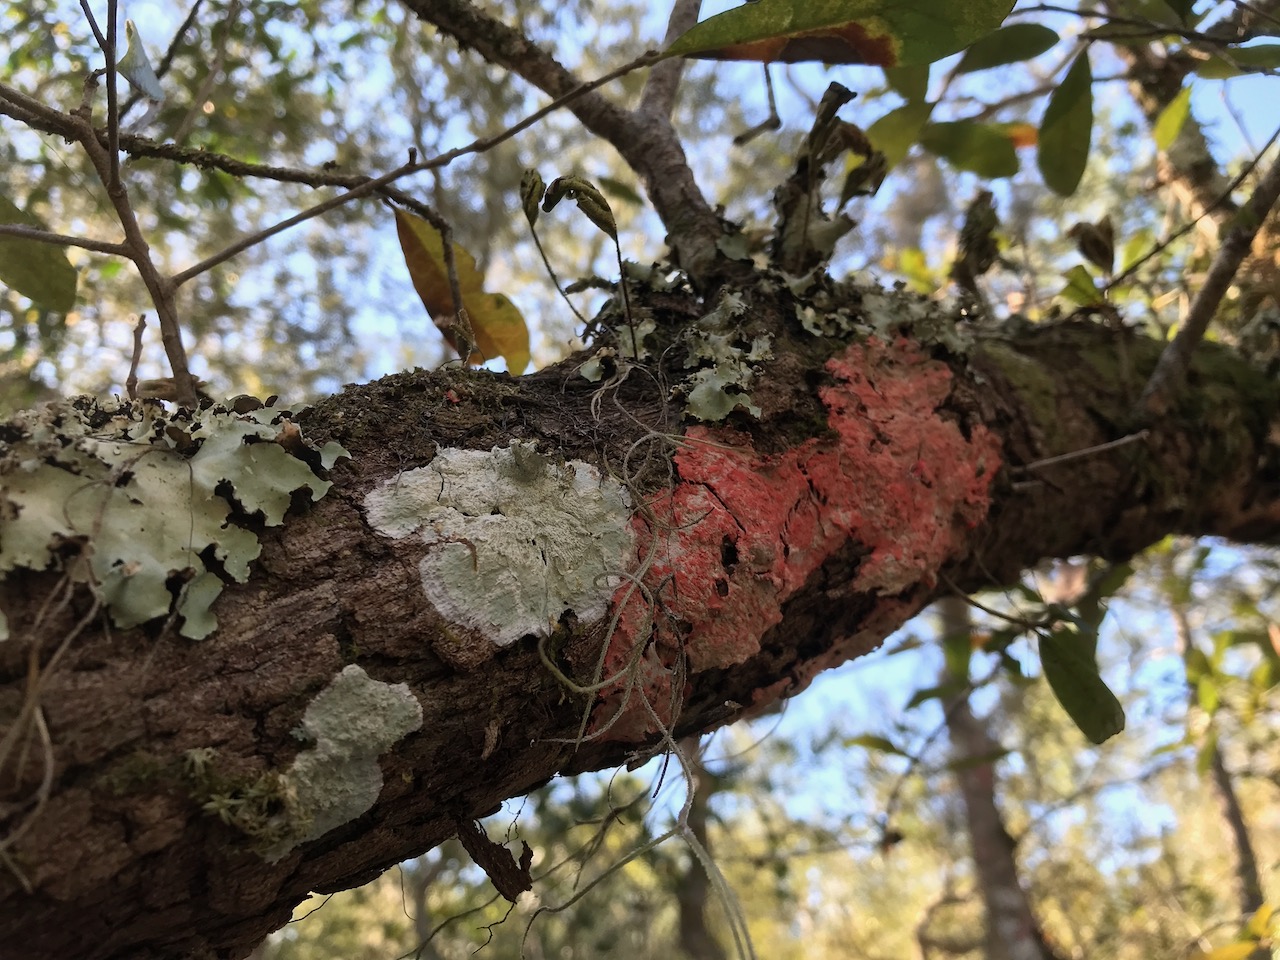 Pink and white lichen on a tree branch